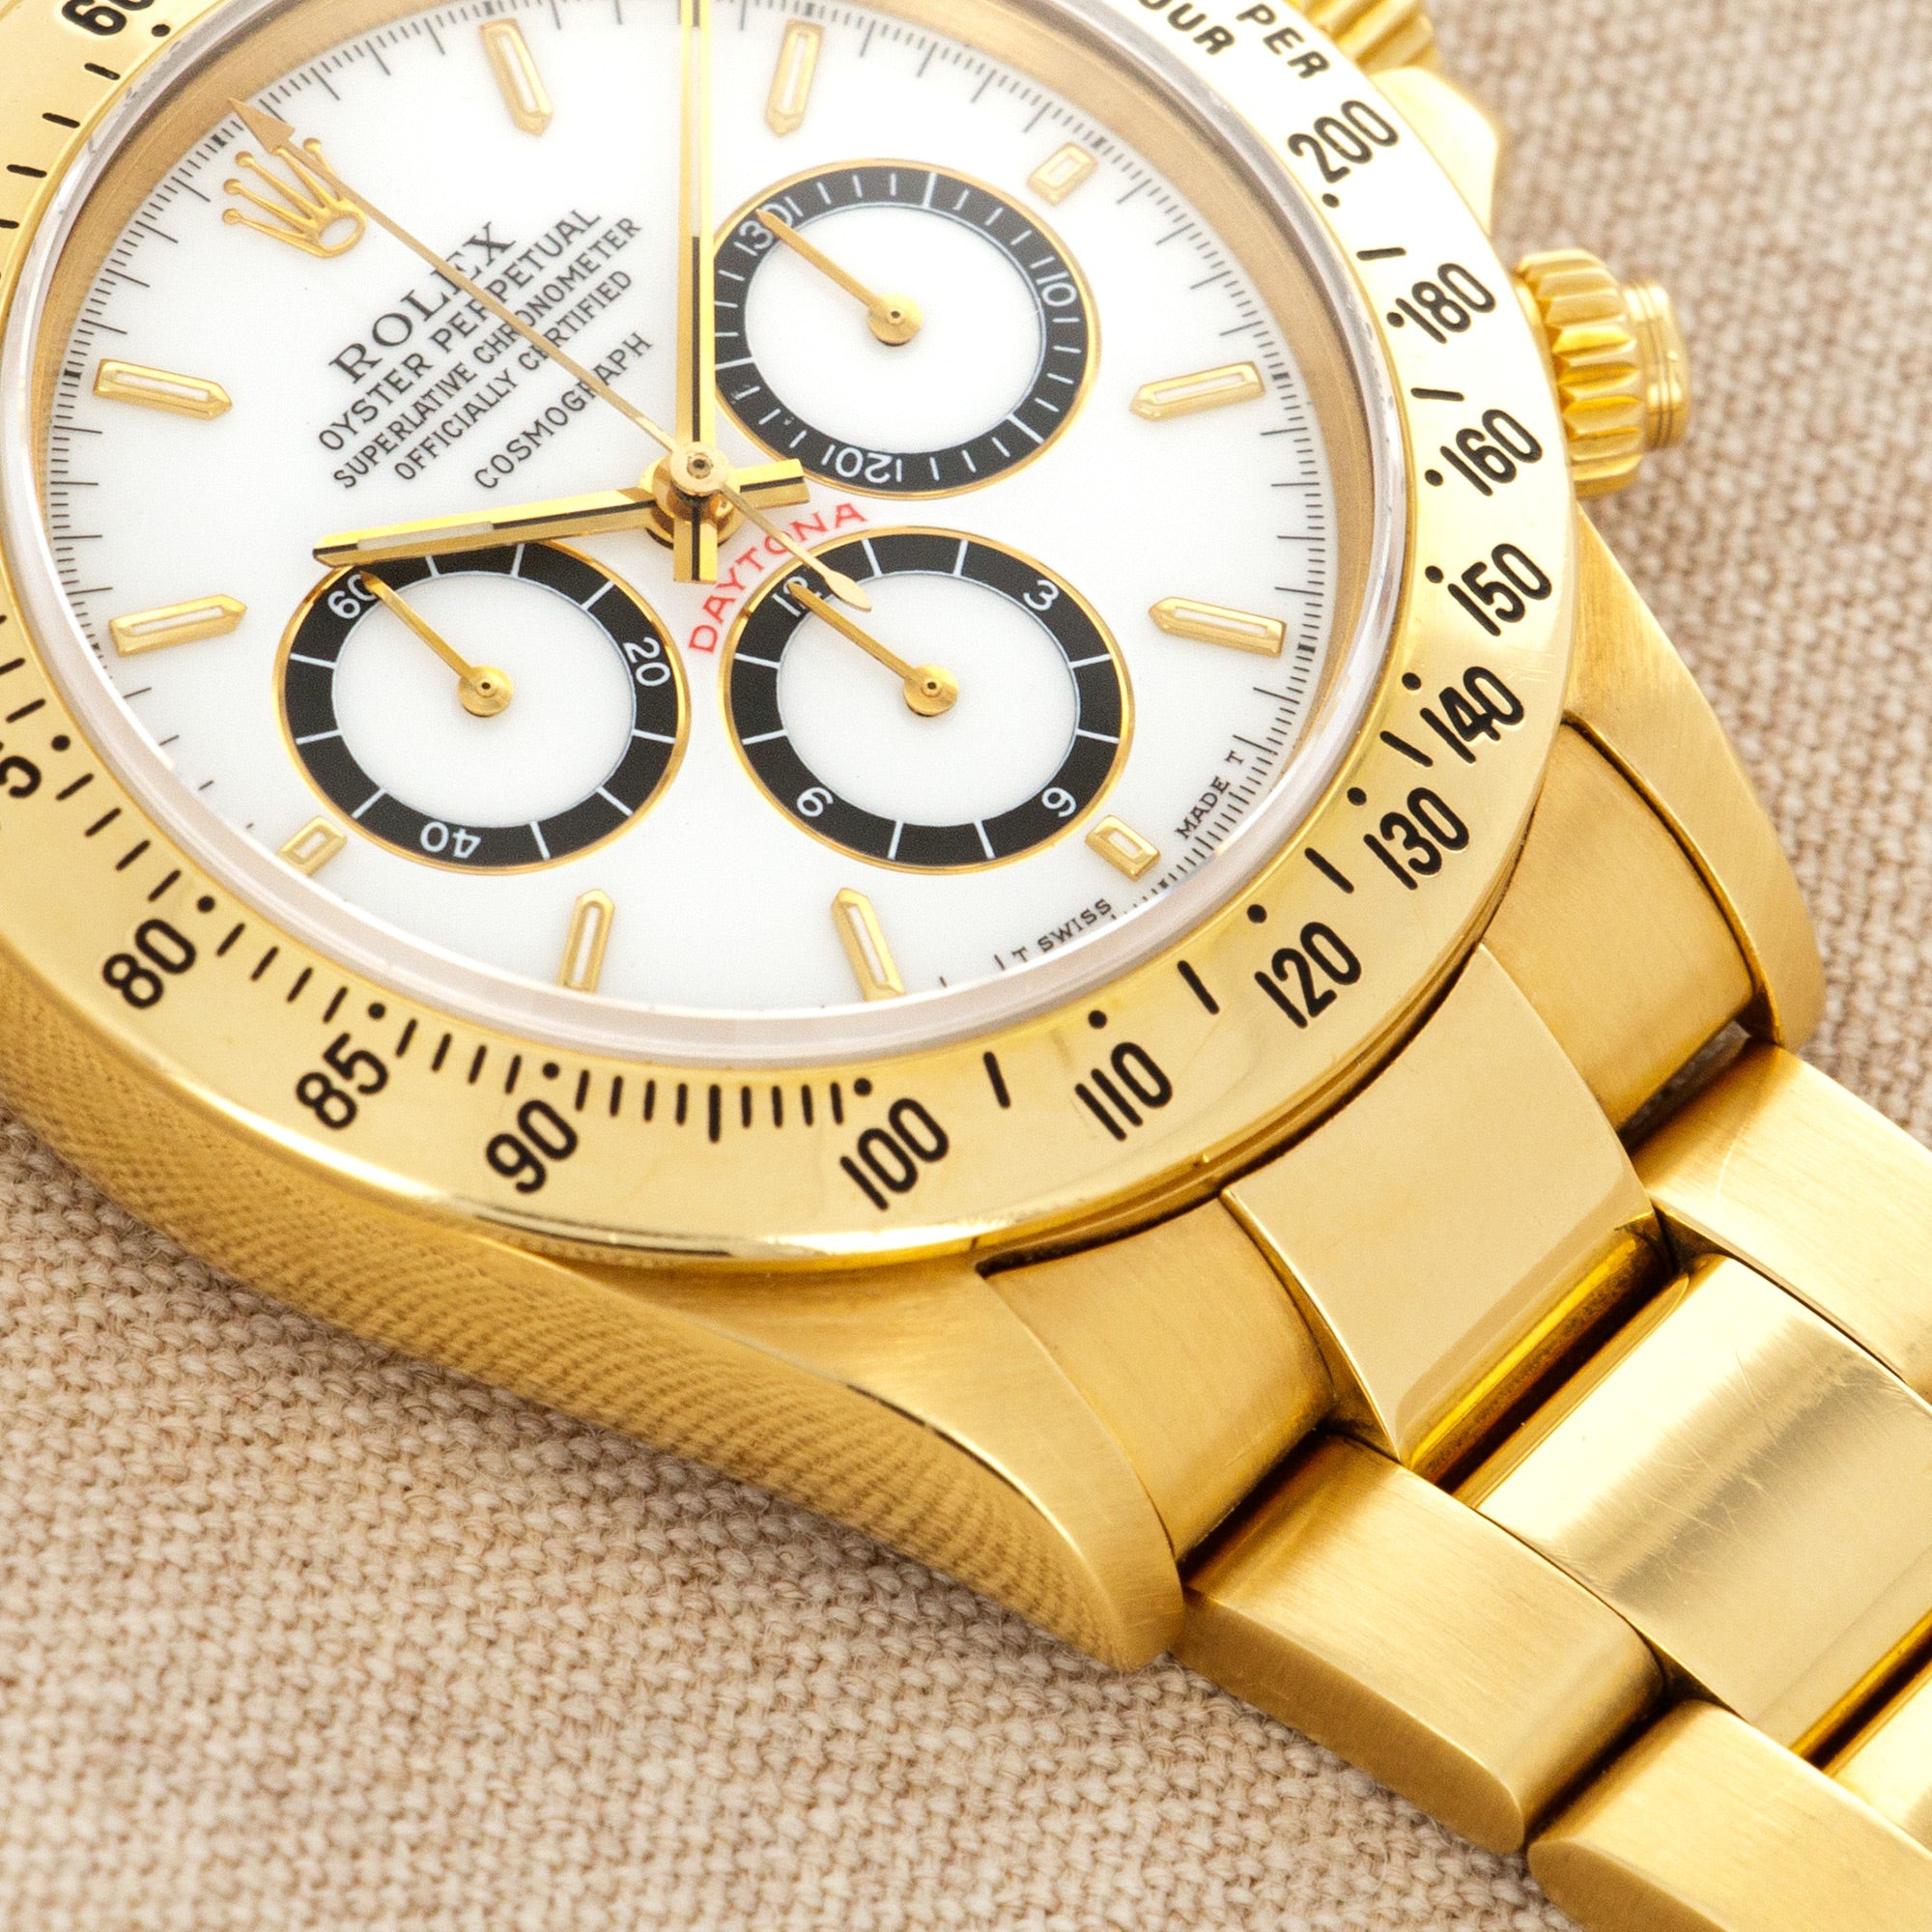 Rolex - Rolex Yellow Gold Zenith Daytona Ref. 16528 with Porcelain Dial - The Keystone Watches